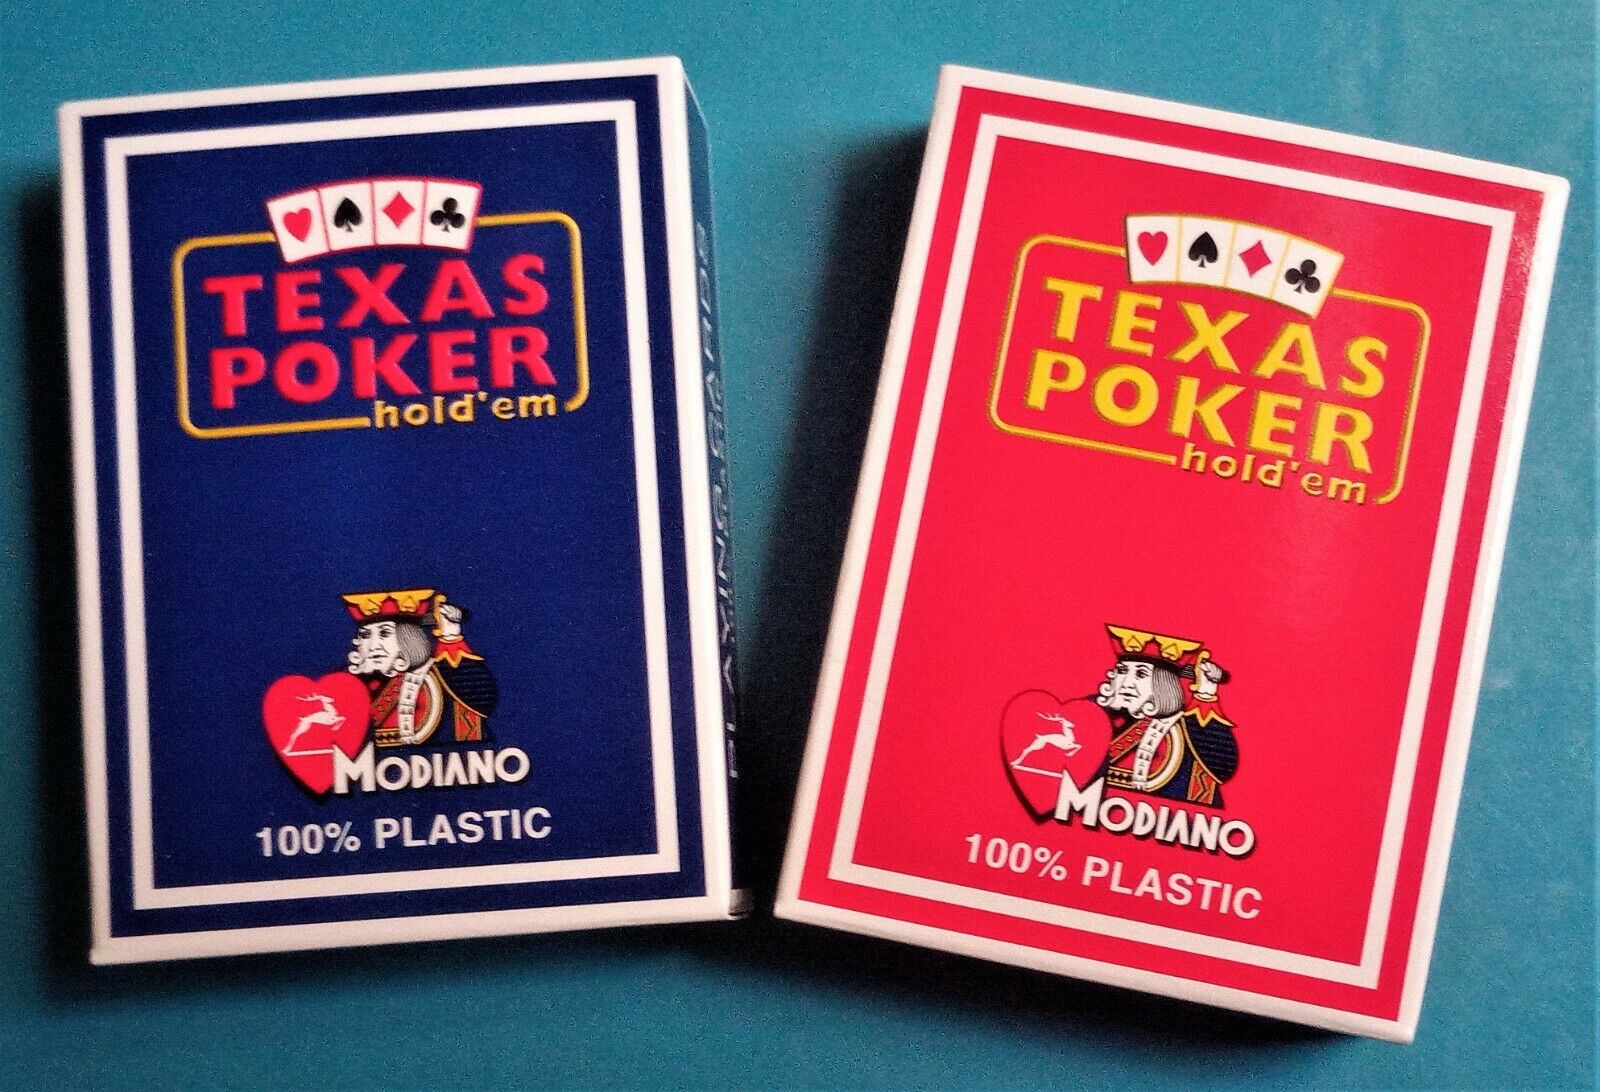 Set - Modiano Texas Poker Hold\'em 100% Plastic Playing Cards Blue & Red